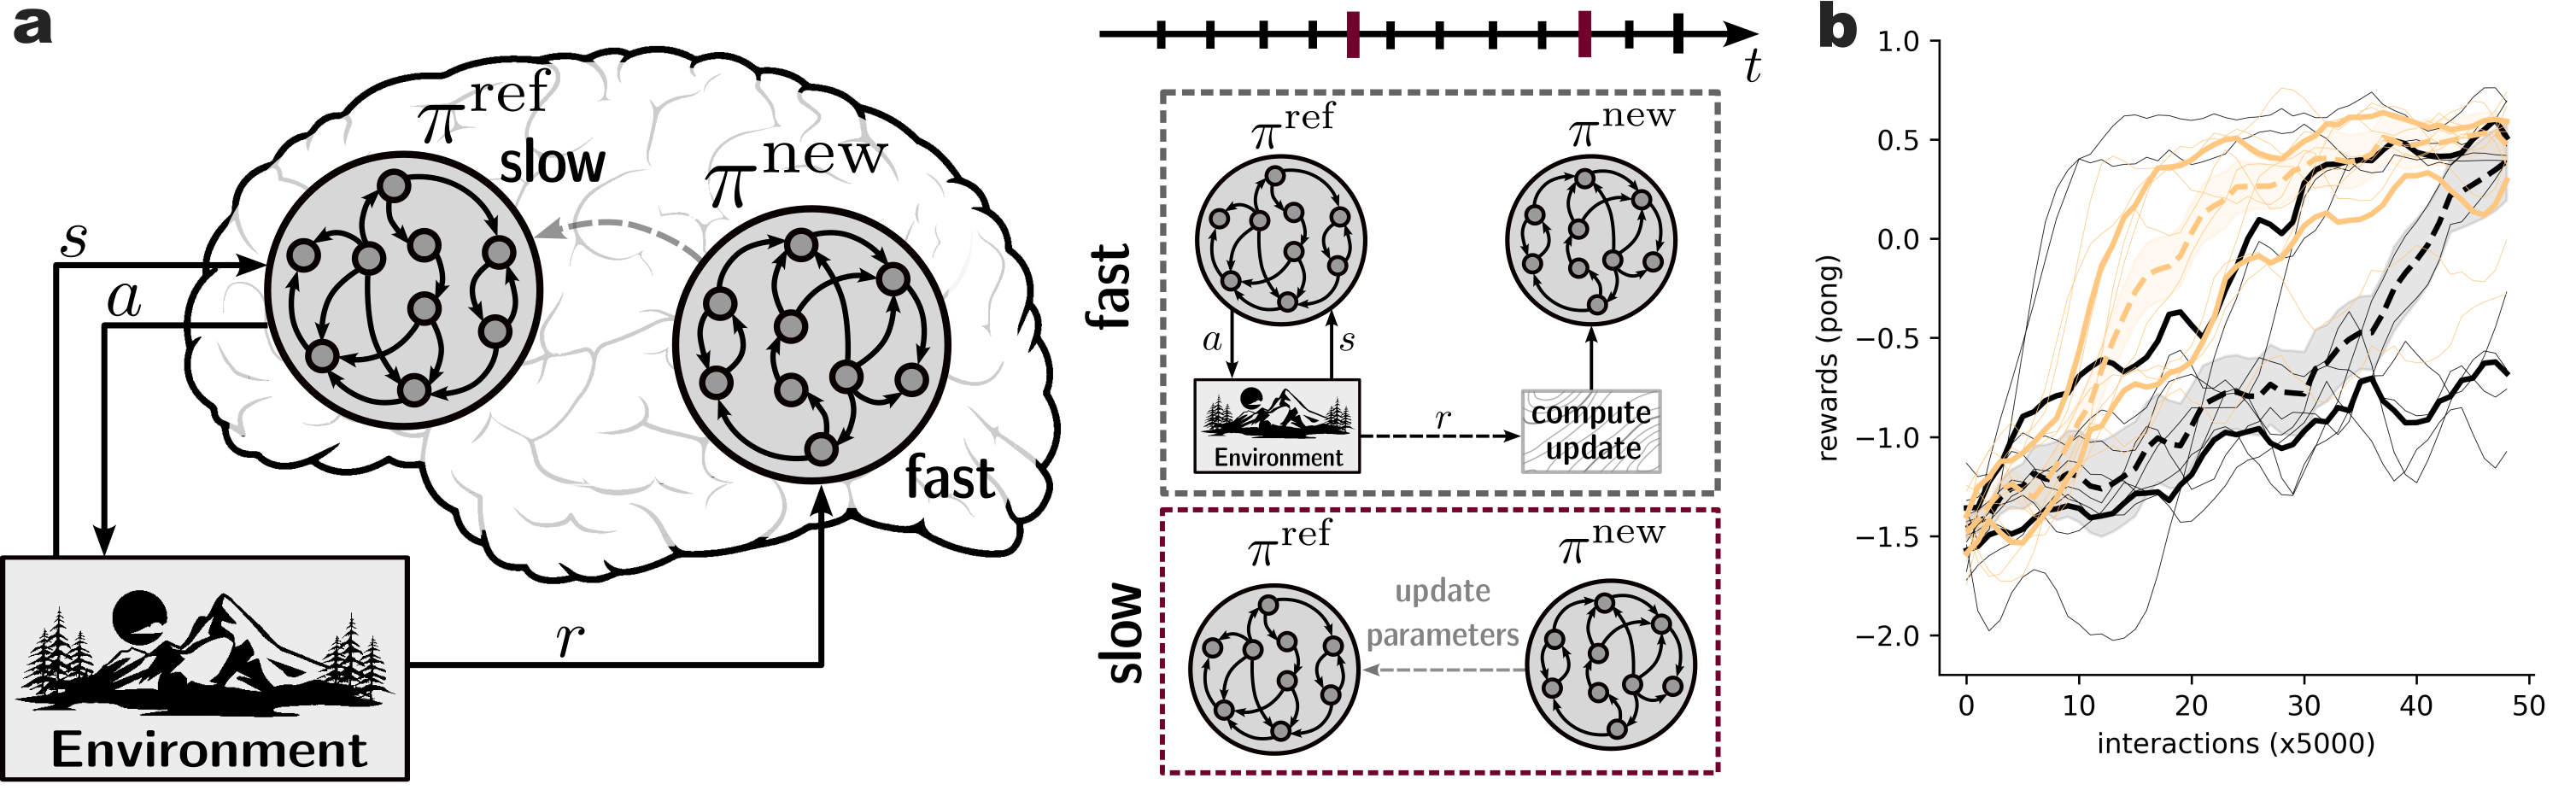 Learning fast changing slow in spiking neural networks